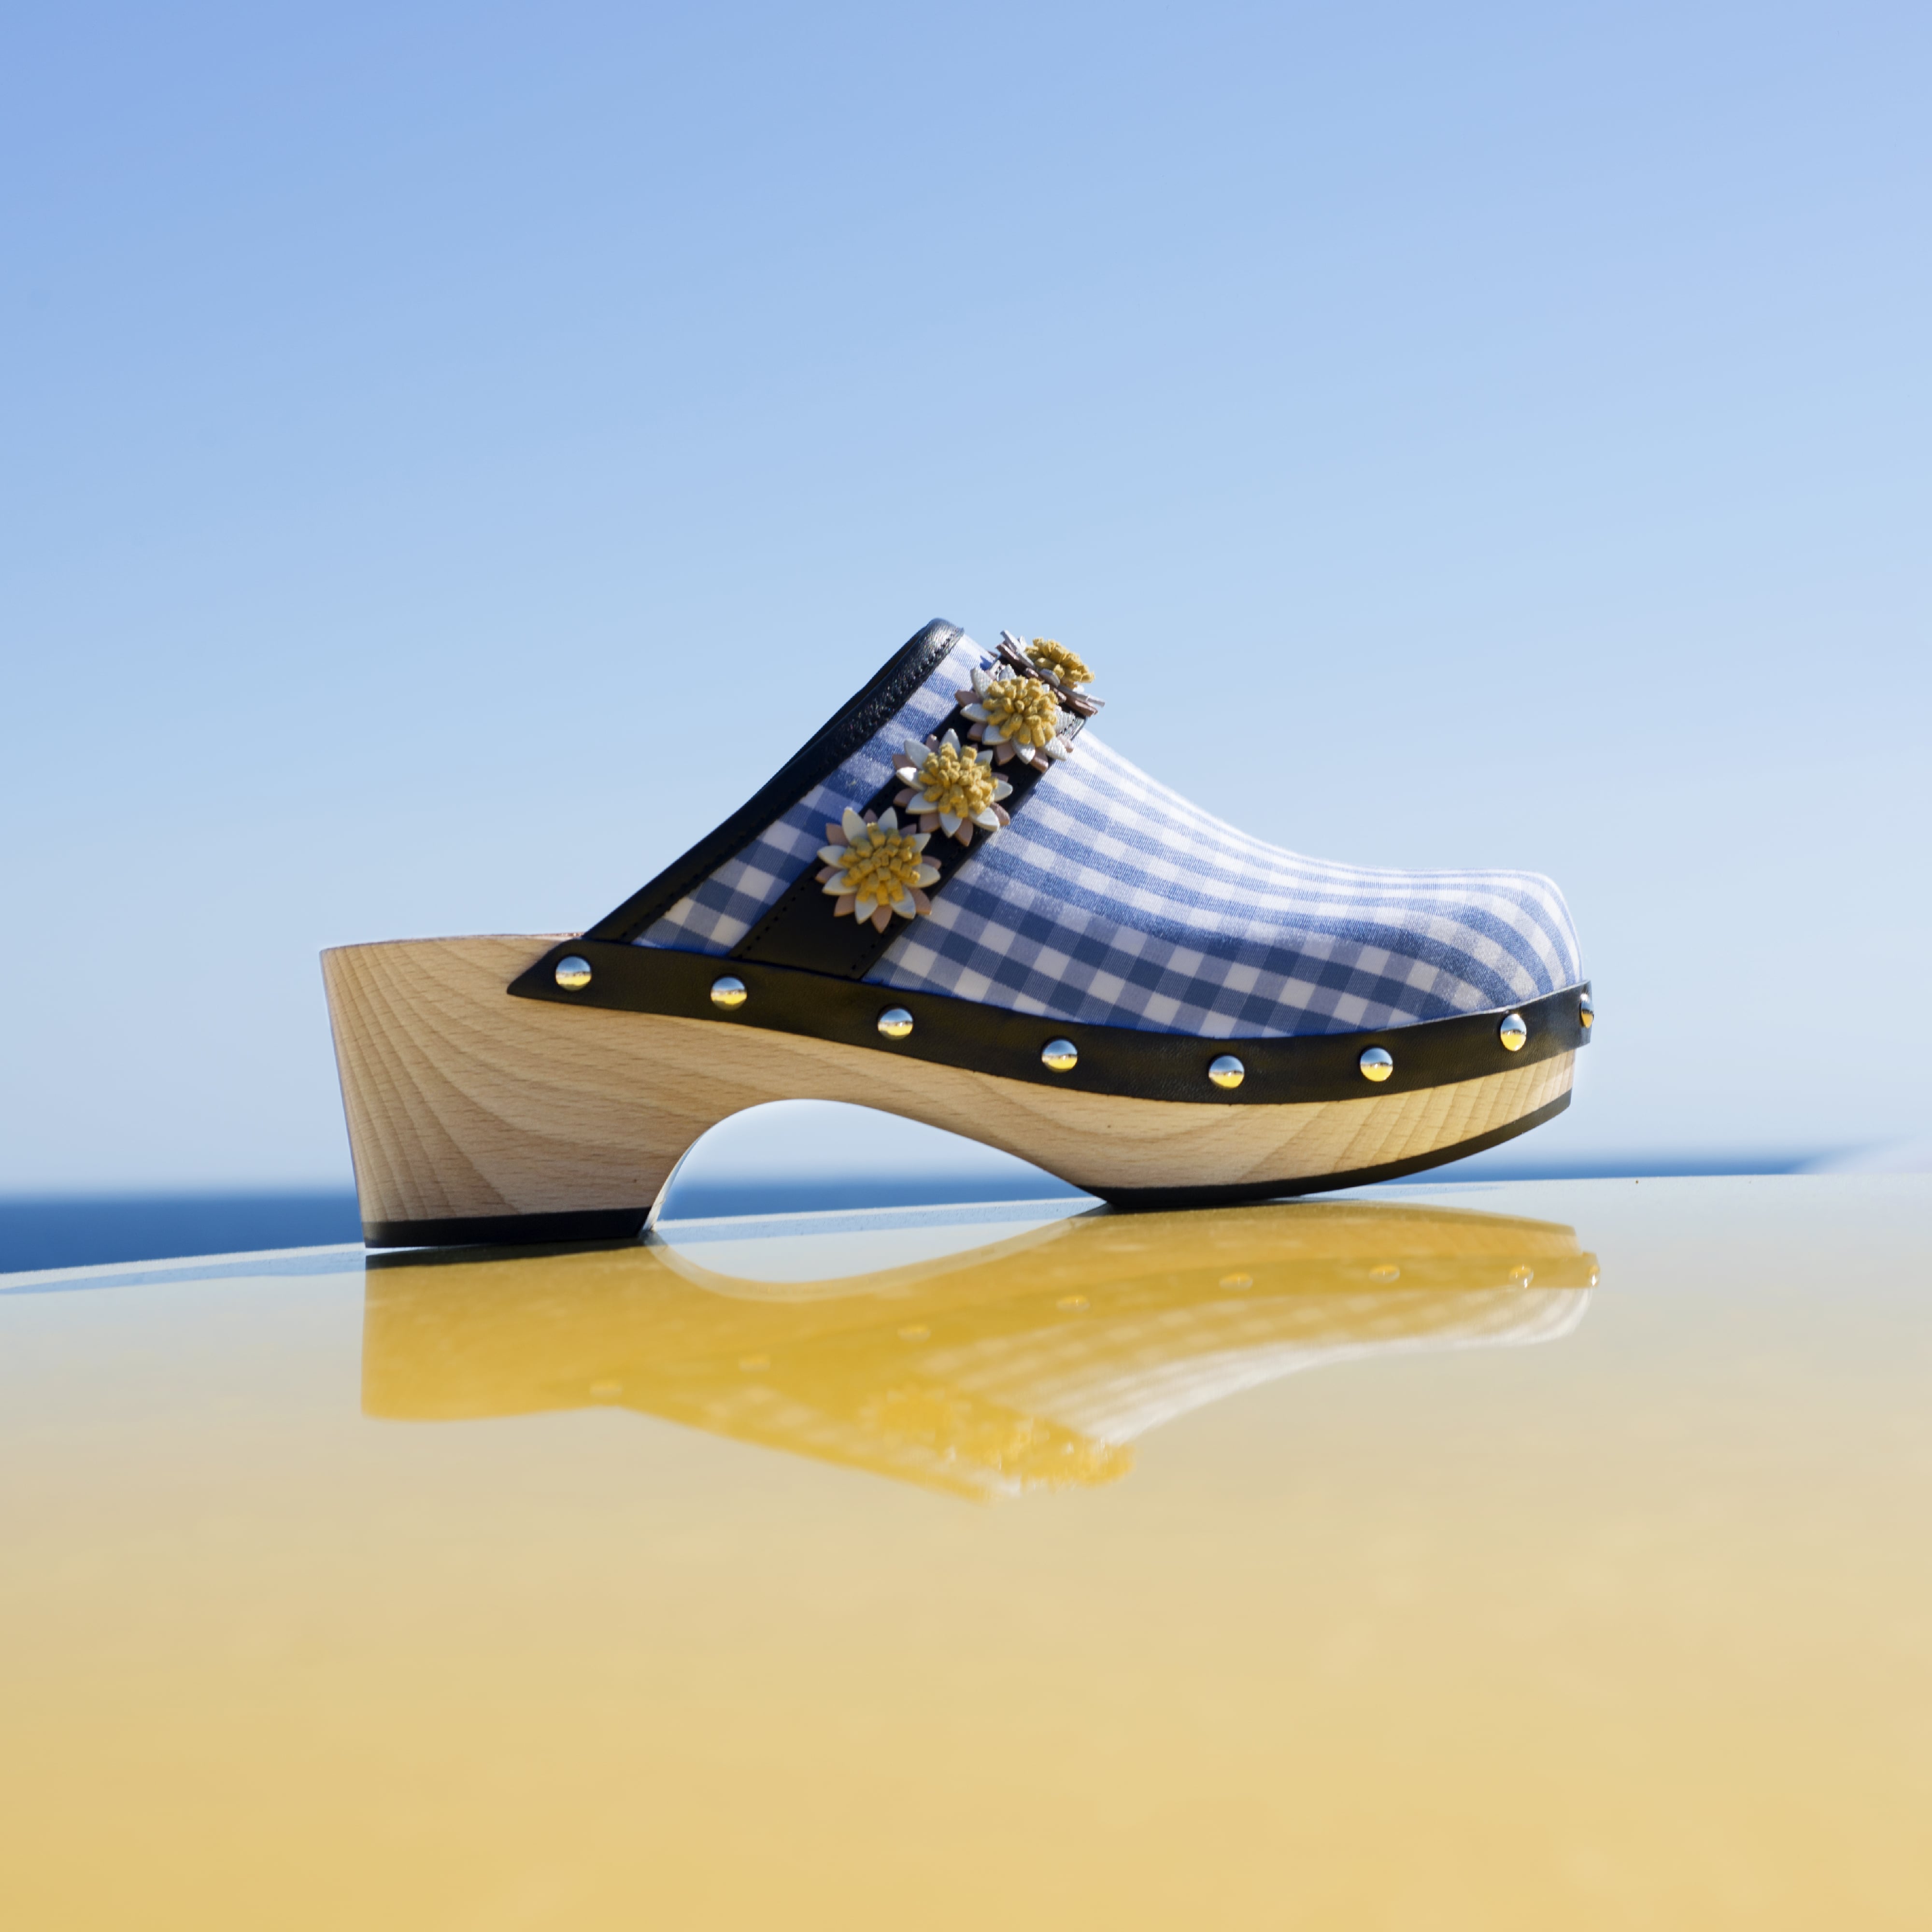 Louis Vuitton Crocs - Discover Comfort And Style Clog Shoes With